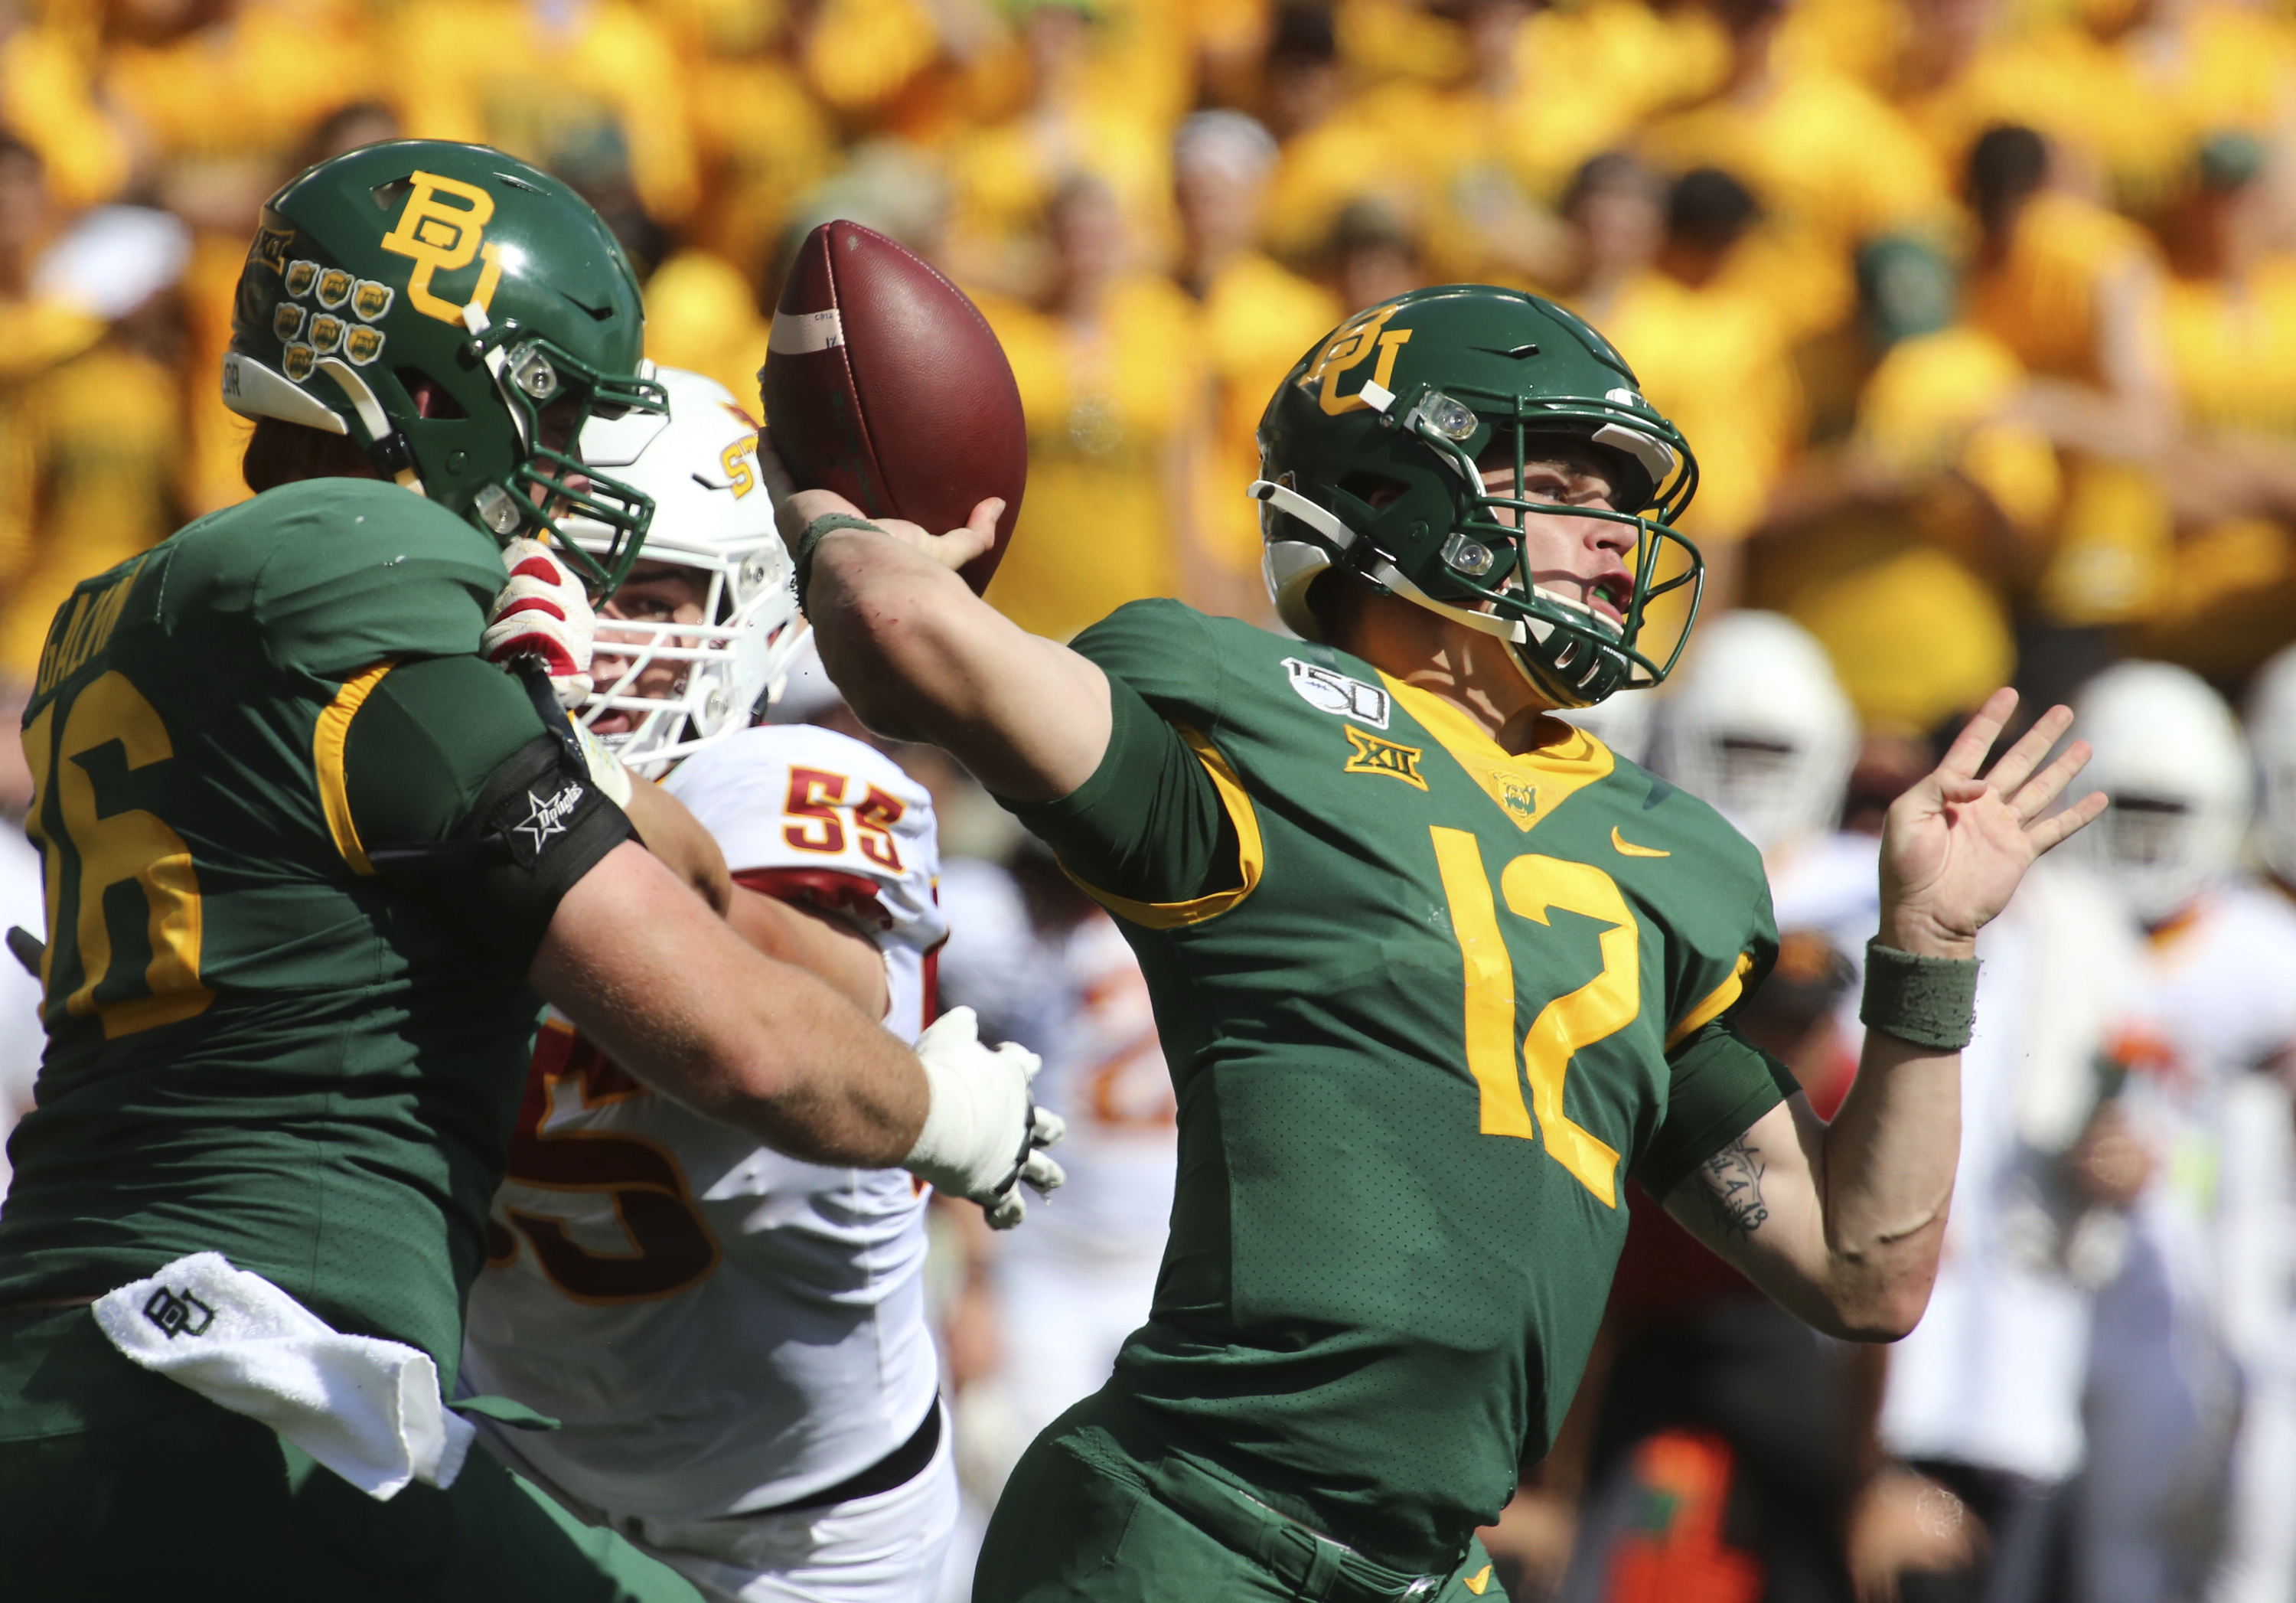 Baylor beats Iowa St 23-21 on FG after blowing 20-point lead